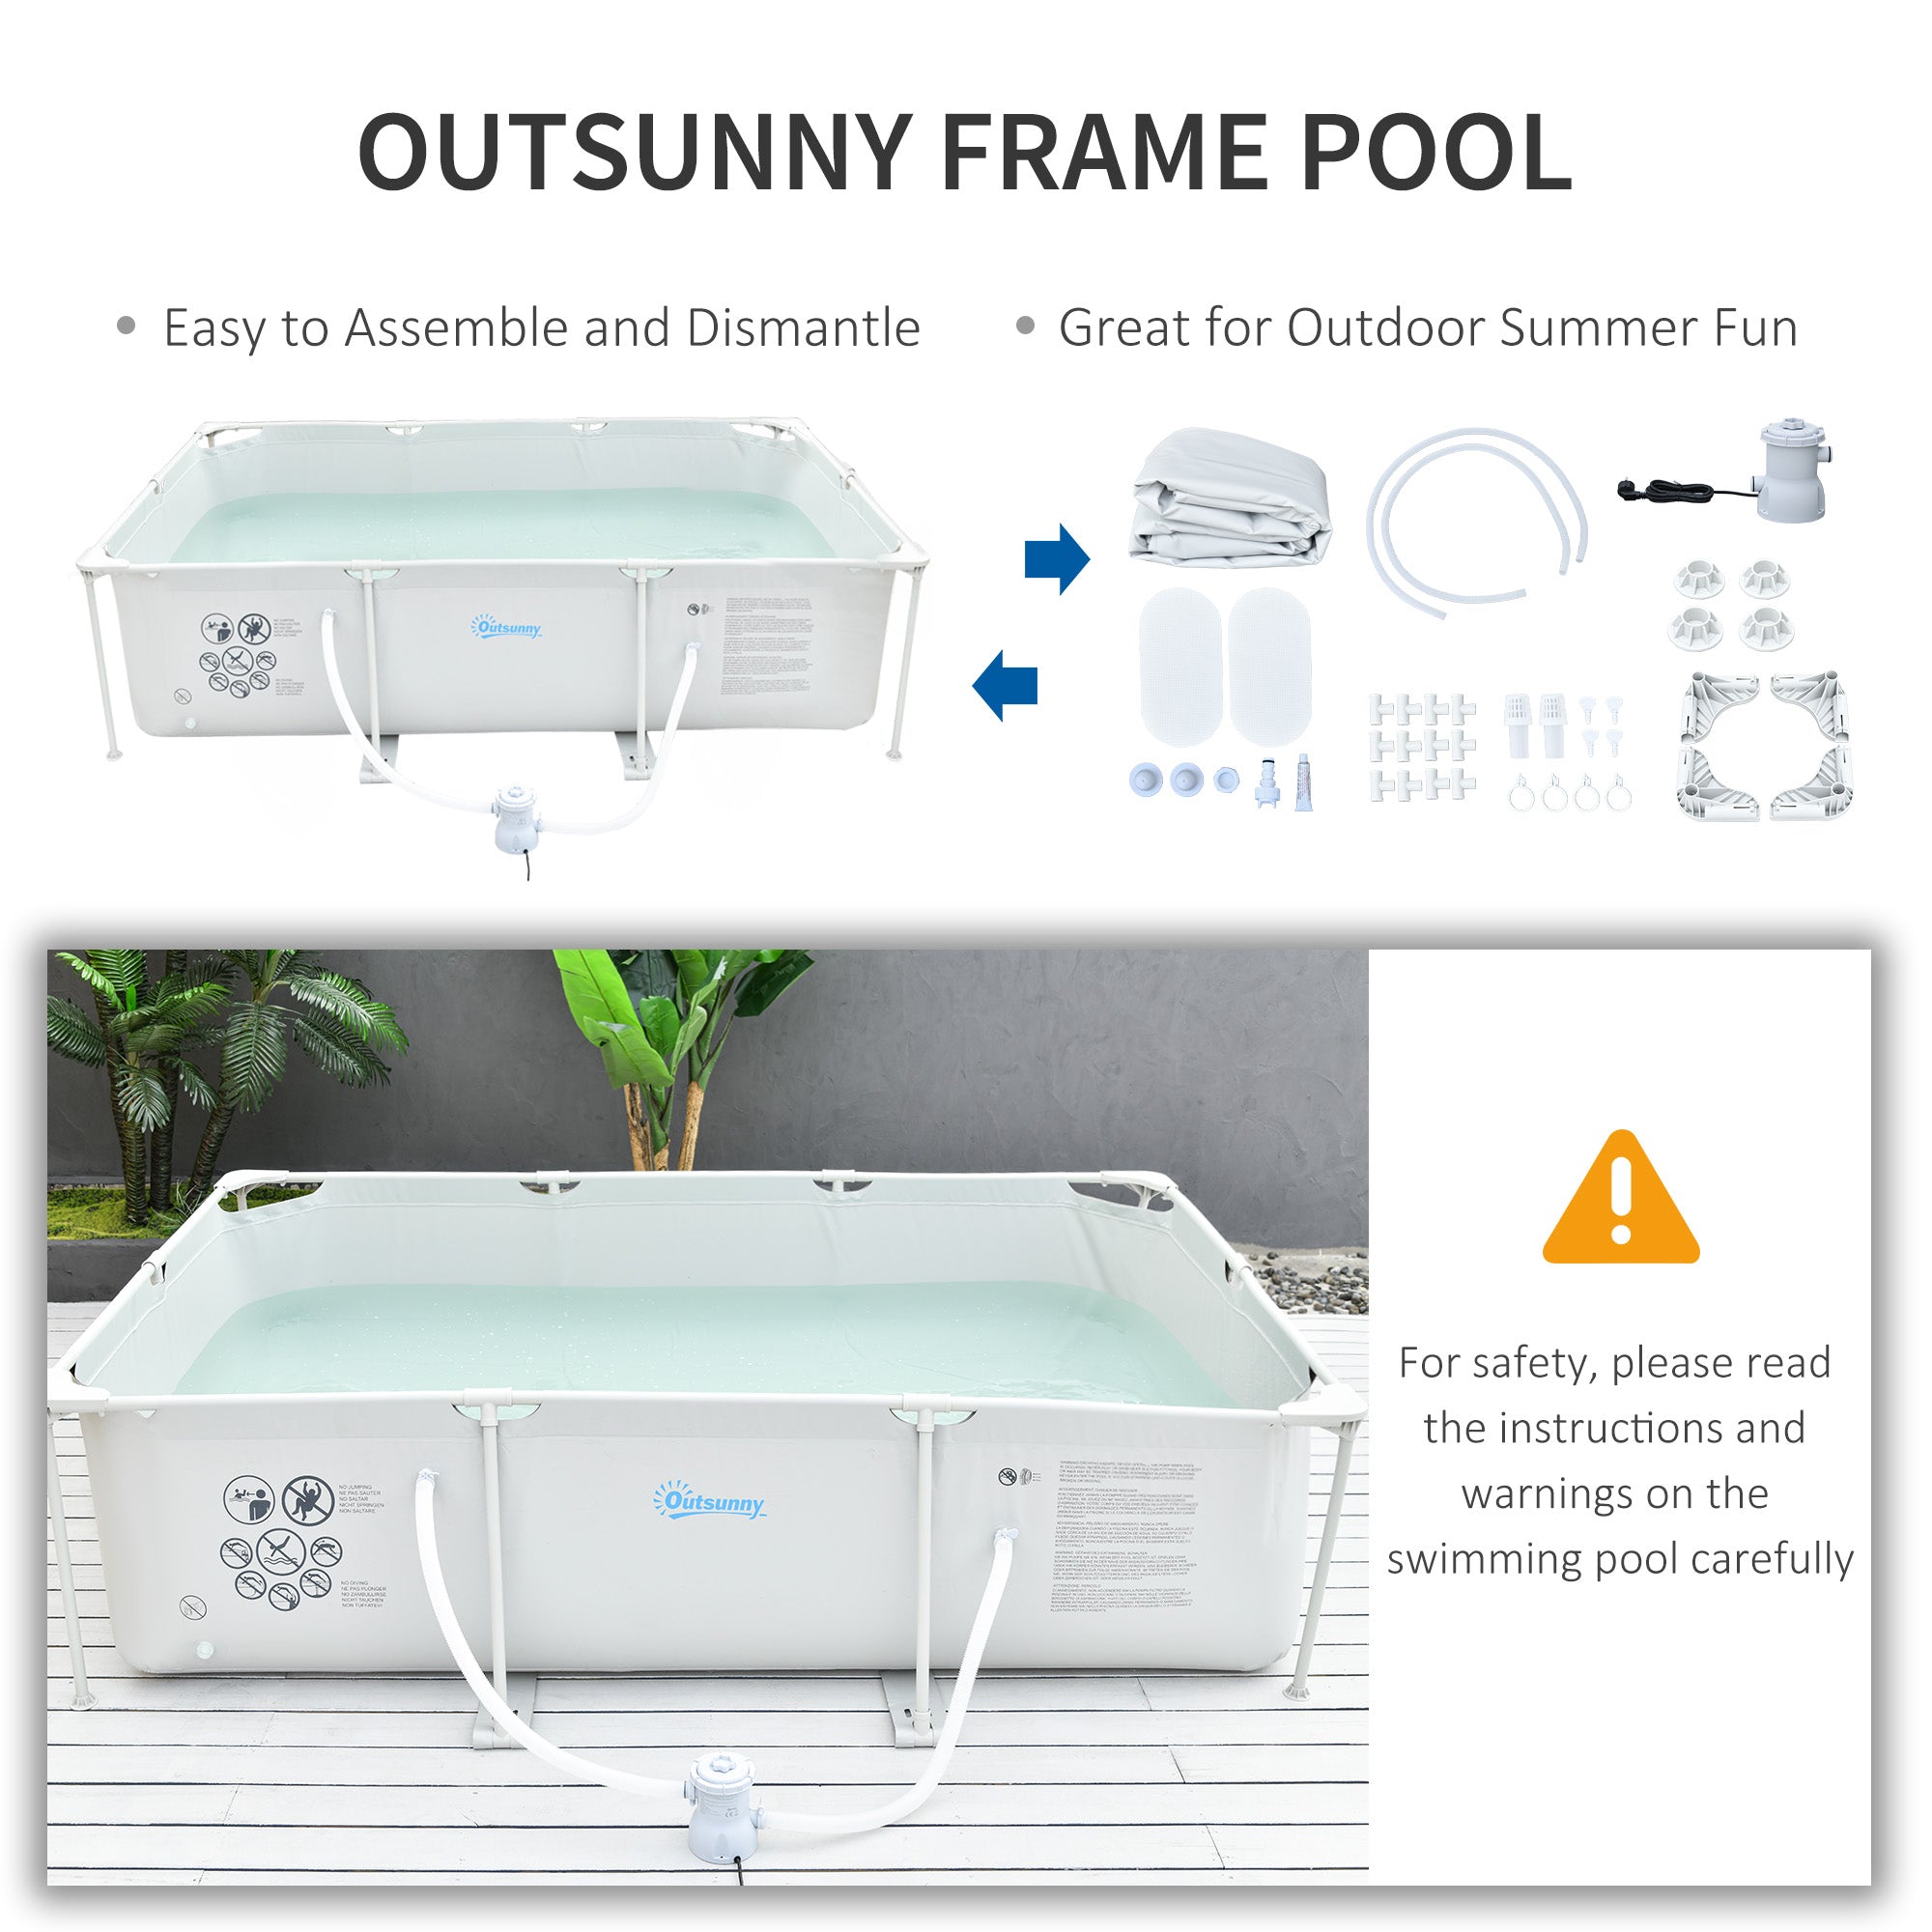 Outsunny Steel Frame Pool with Filter Pump and Filter Cartridge Rust Resistant Above Ground Pool with Reinforced Sidewalls, 292 x 190 x 75cm, Grey - Inspirely